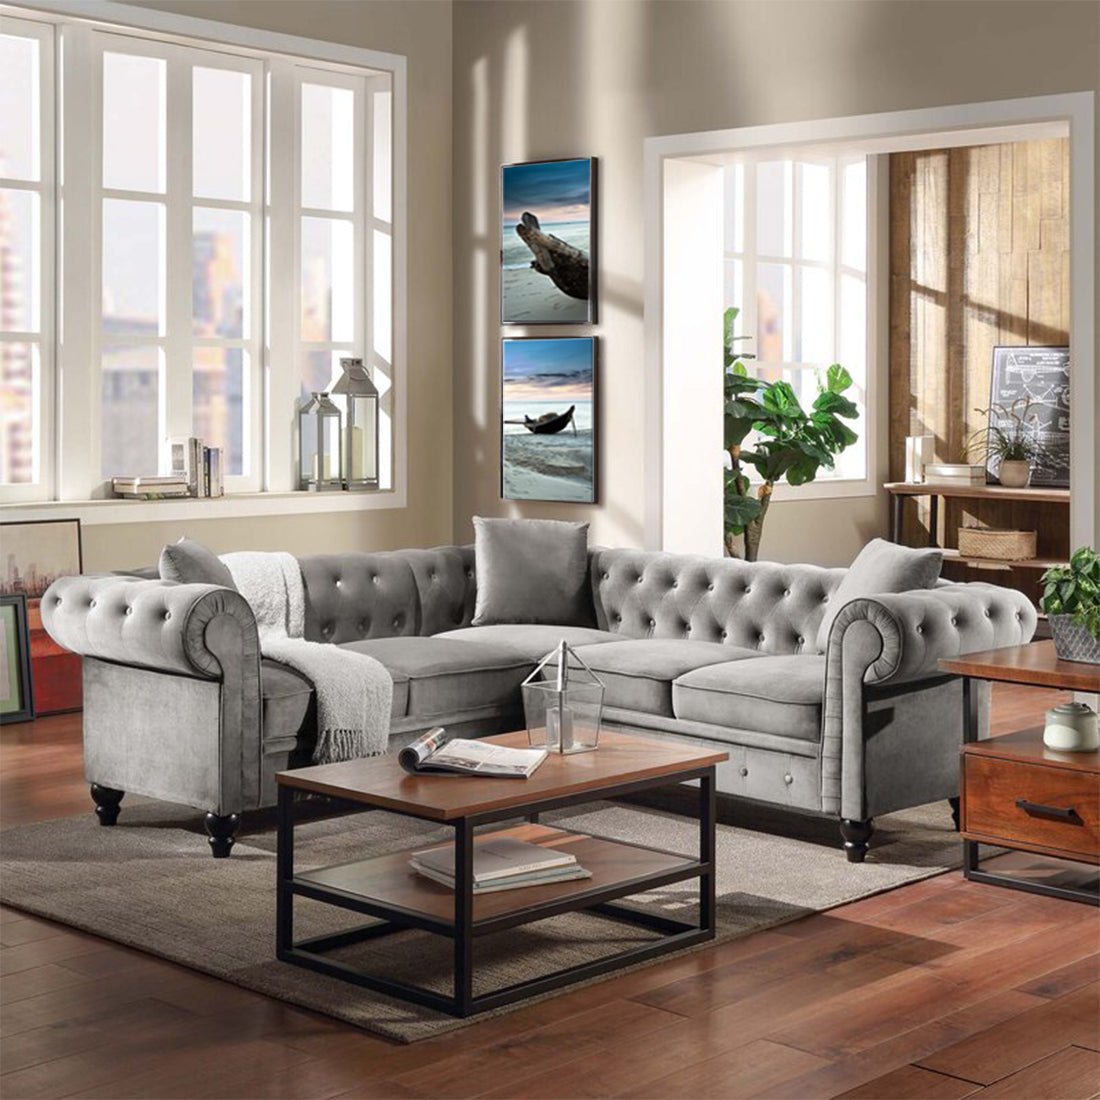 Torque India Glacier solid Wood 5 Seater Fabric L Shape Chesterfield Sofa for Living Room - Grey - Torque India